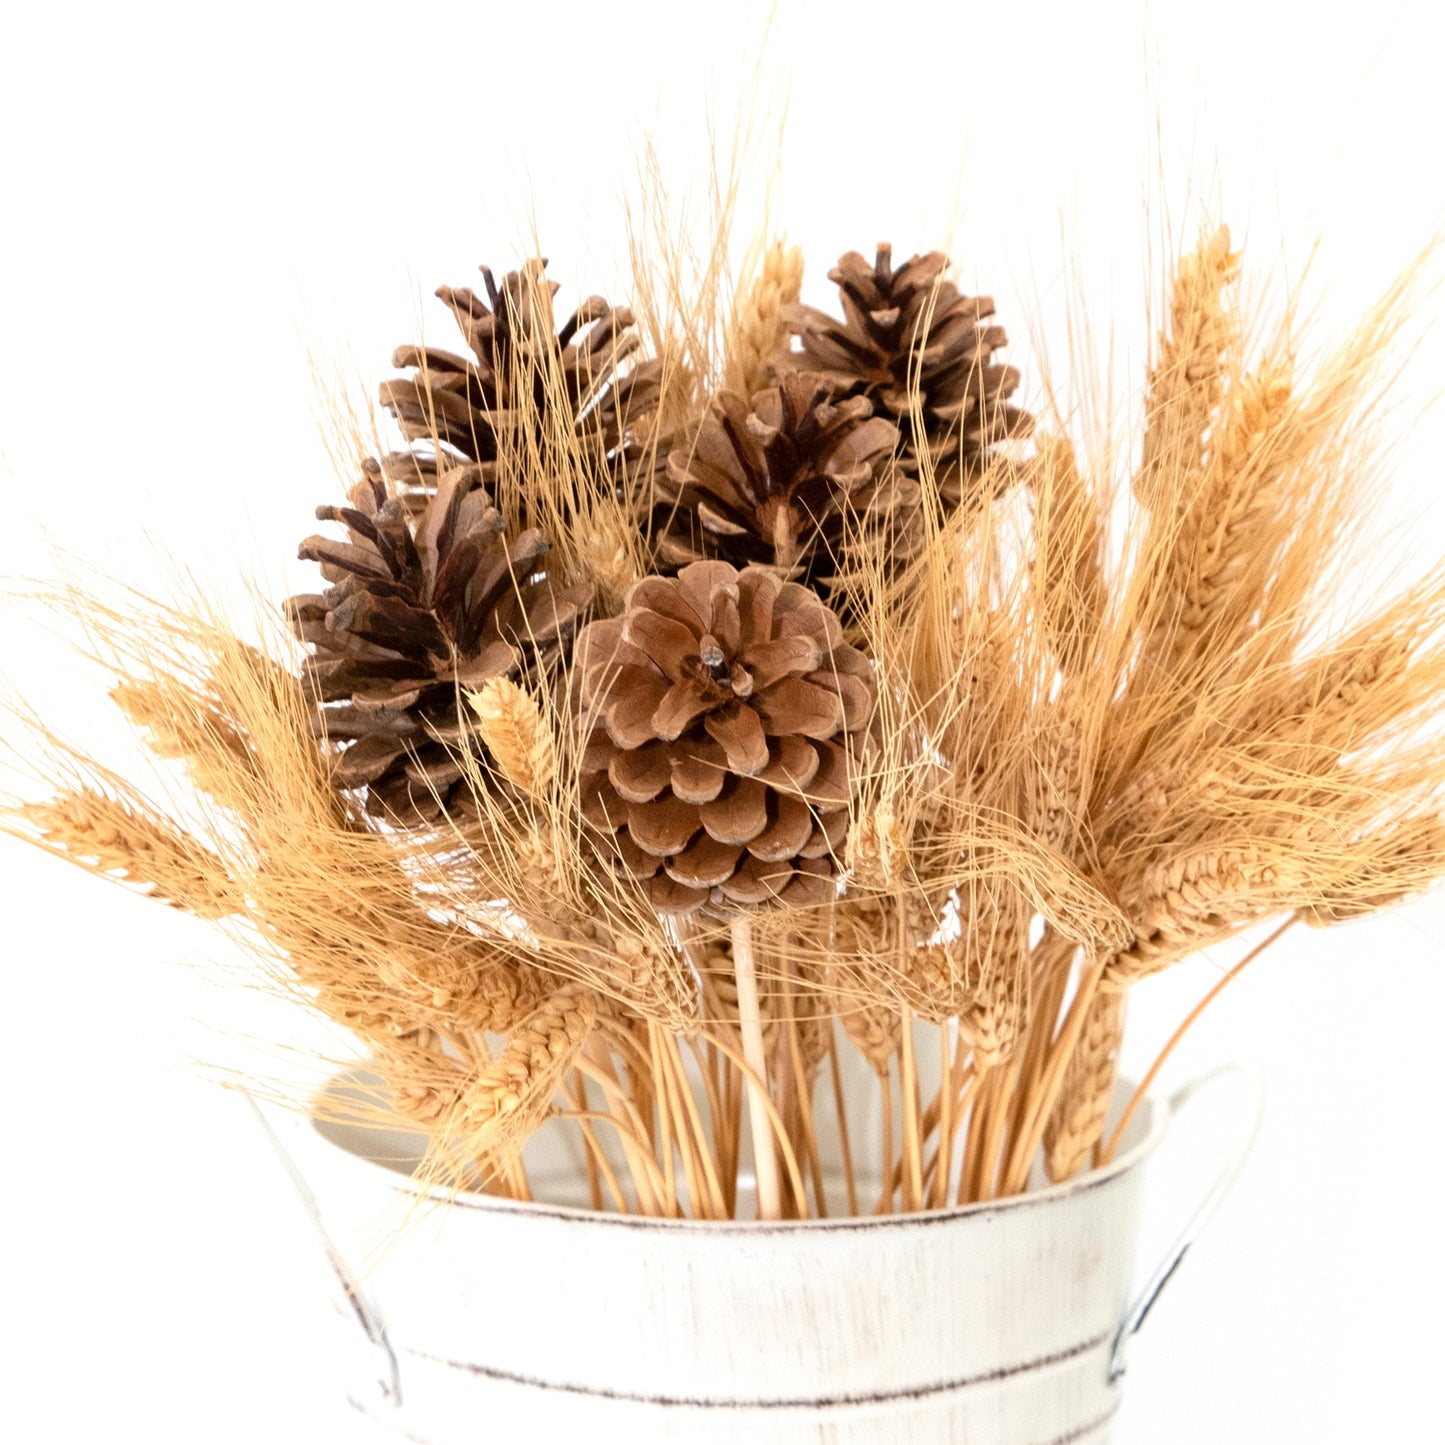 Wheat and Pinecone Rustic Bouquet closeup